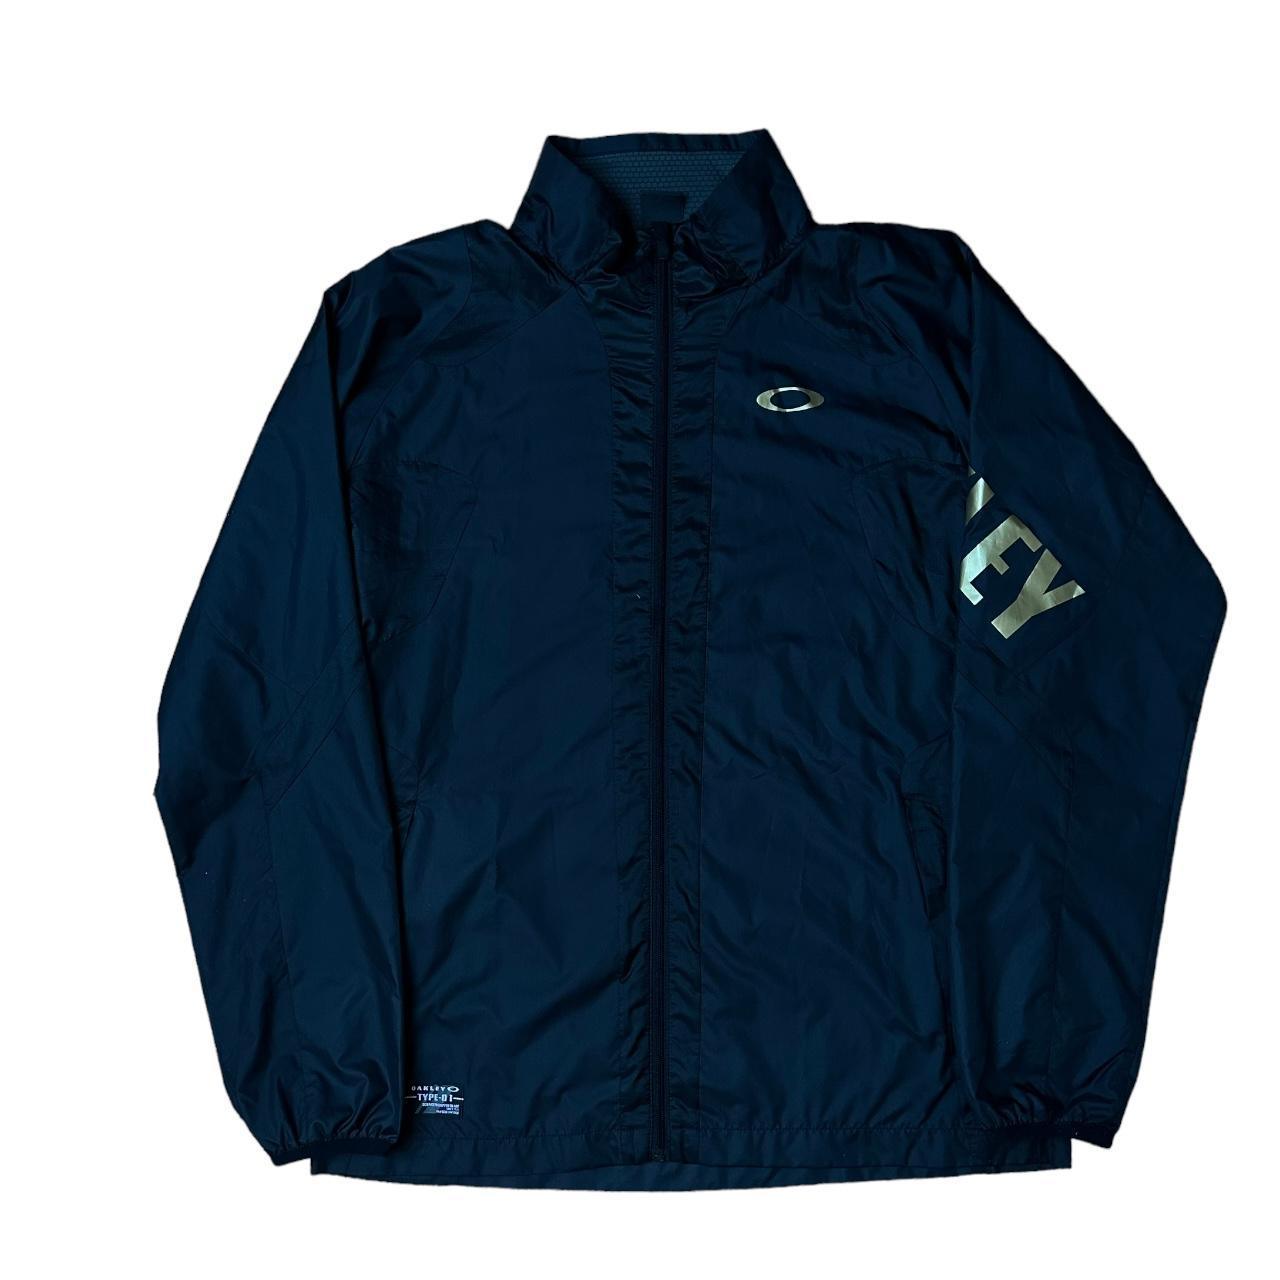 Oakley Black and gold Windbreaker/ Shell suit - Known Source